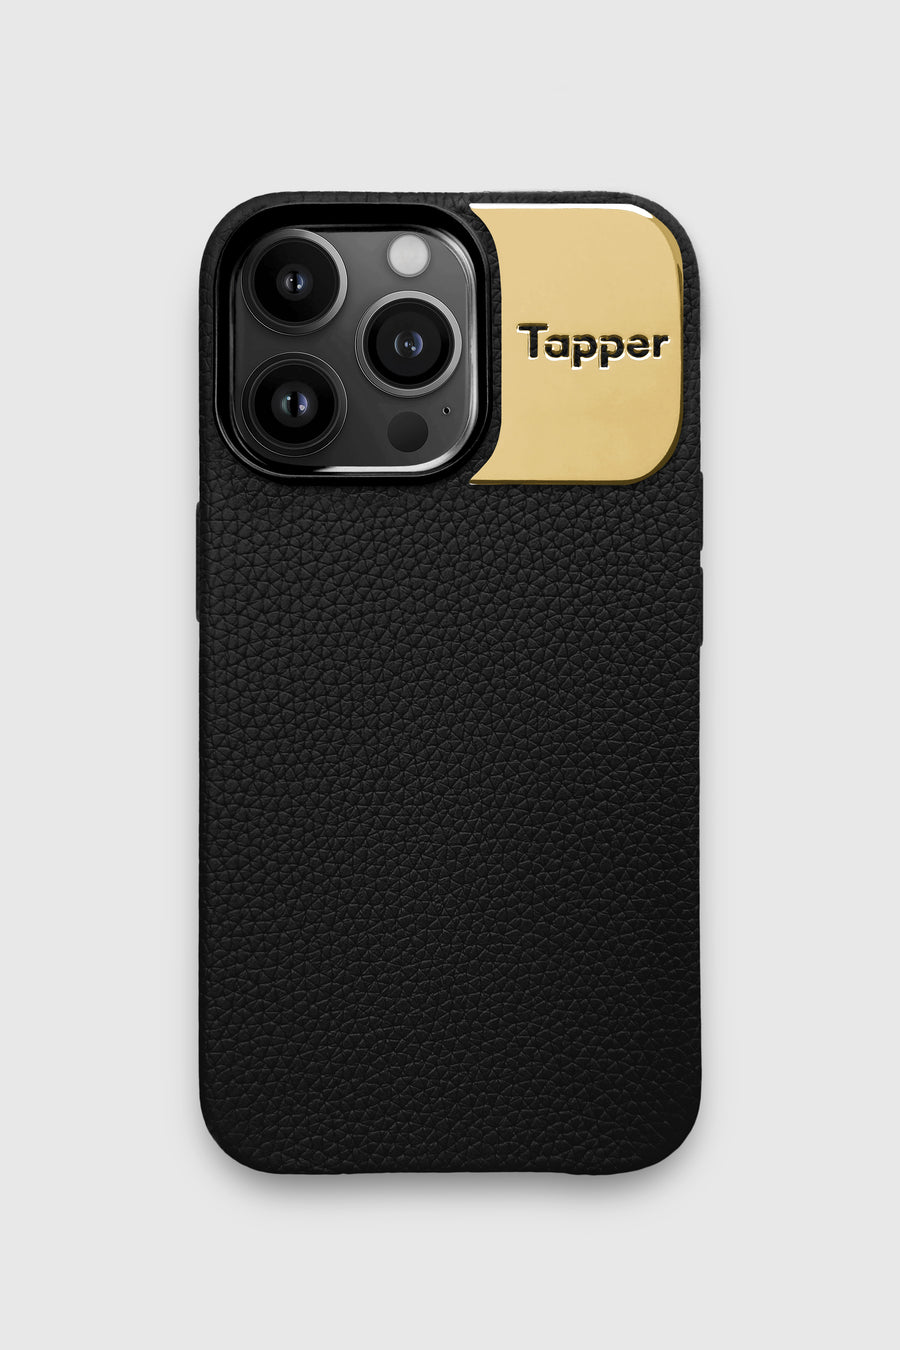 Tapper's luxurious black genuine cow leather iPhone 13 Pro case with MagSafe and a metal logo plate in 18k gold plating that protects and elevates the look of your iPhone 13 Pro. The next must-have high end protective Apple iPhone accessory in real leather and precious metals.  Designed in Sweden by Tapper. Free Express Shipping at gettapper.com